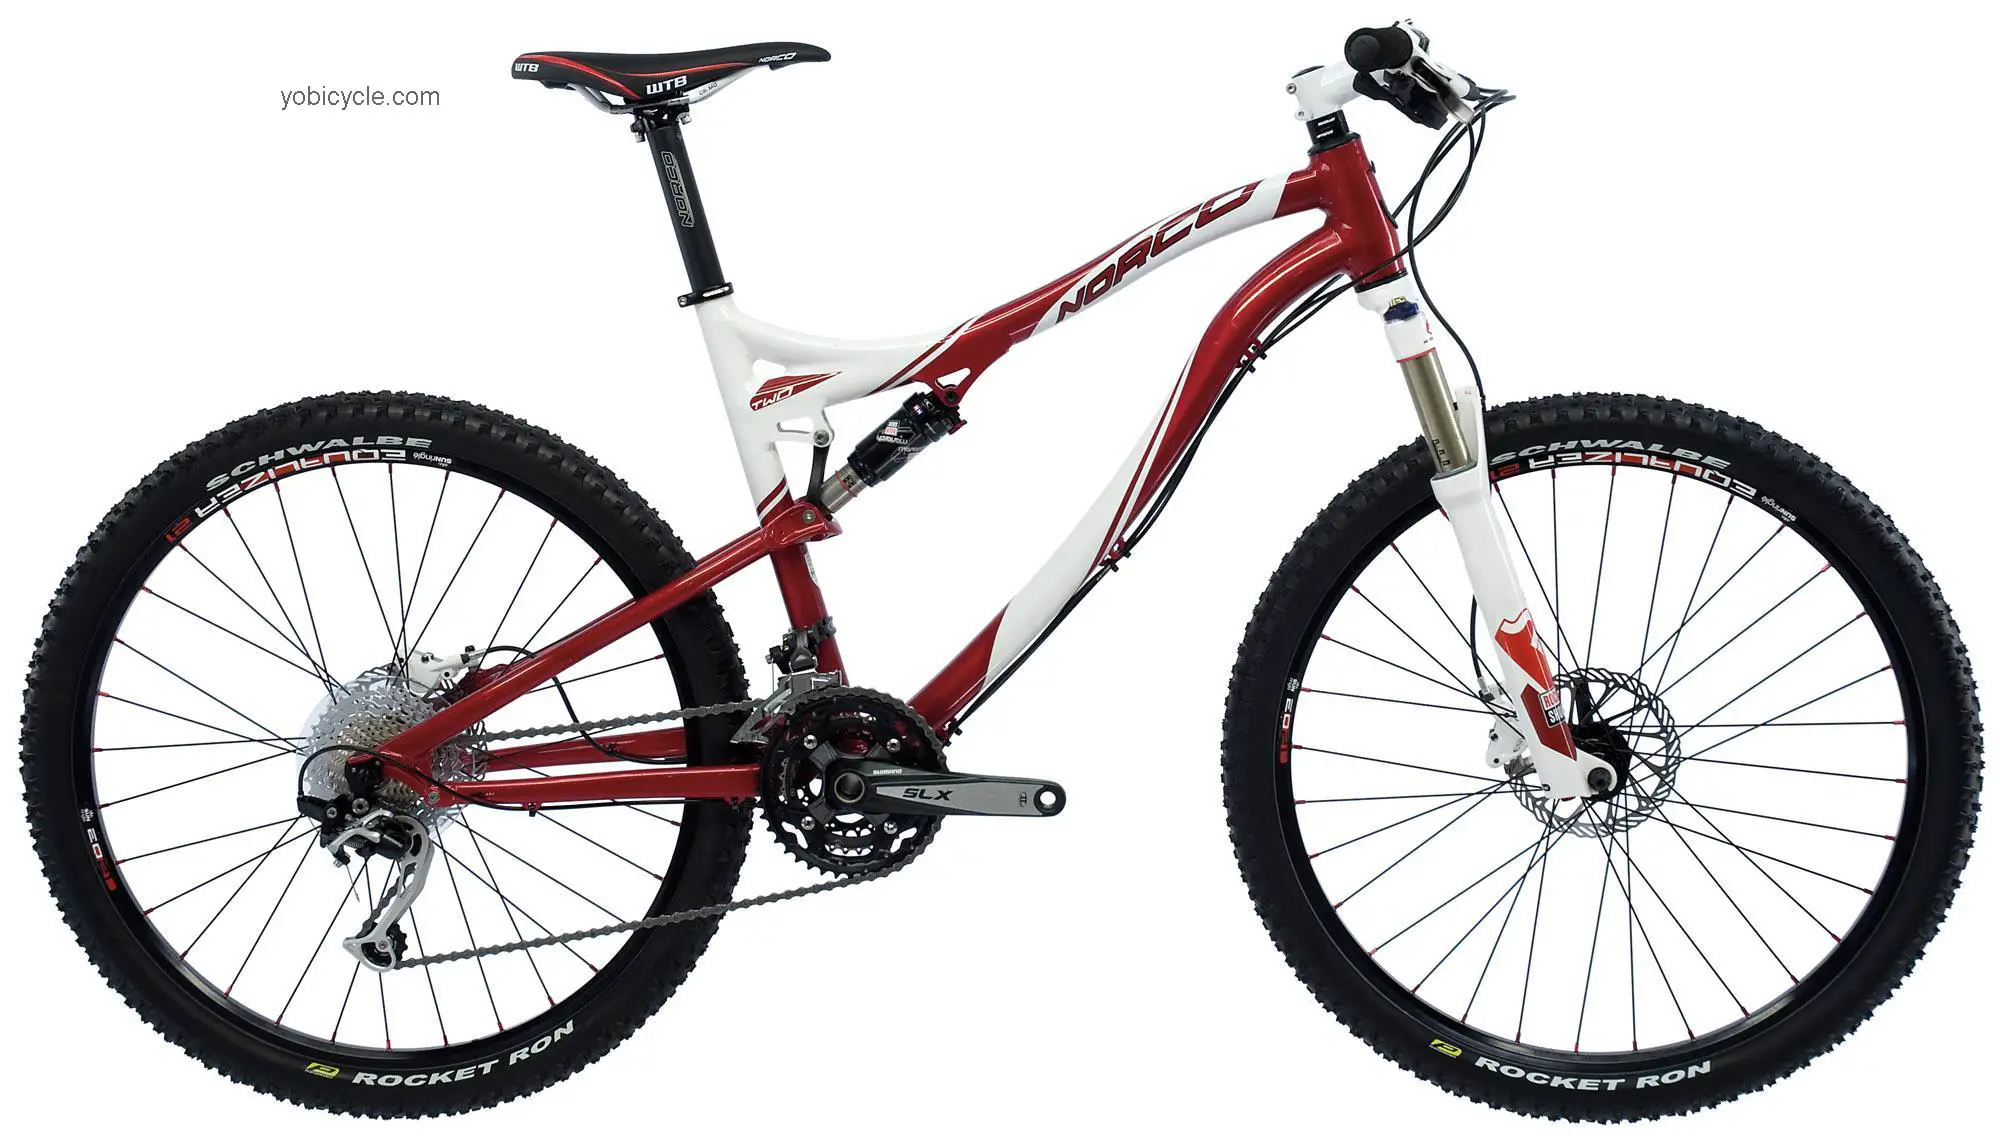 Norco Phaser 2 2011 comparison online with competitors